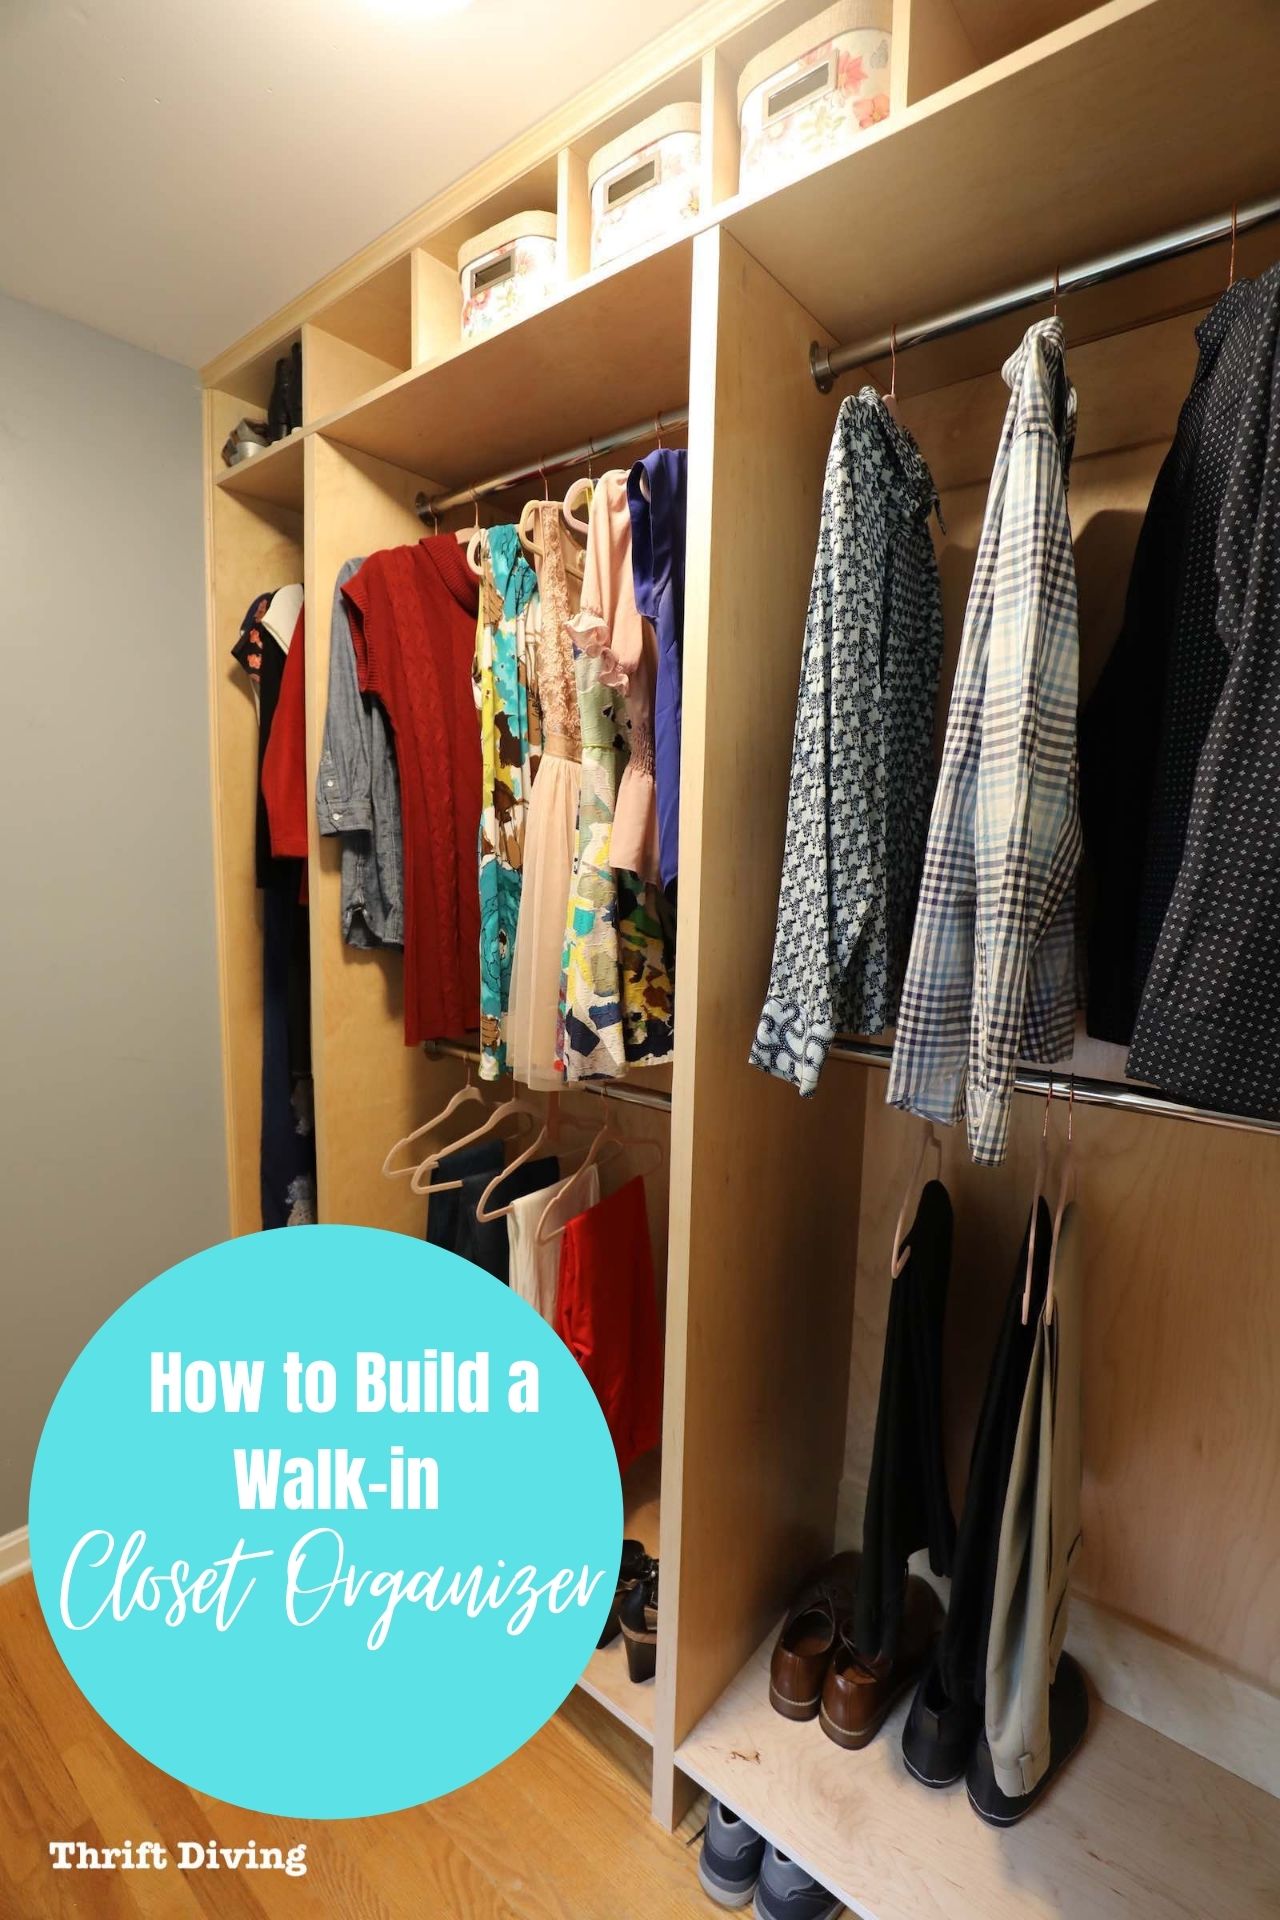 How to Build a Custom Walk-in Closet from Scratch! - Learn how to build your own closet step-by-step in a small walk-in closet. Includes video with helpful tips! - Thrift Diving